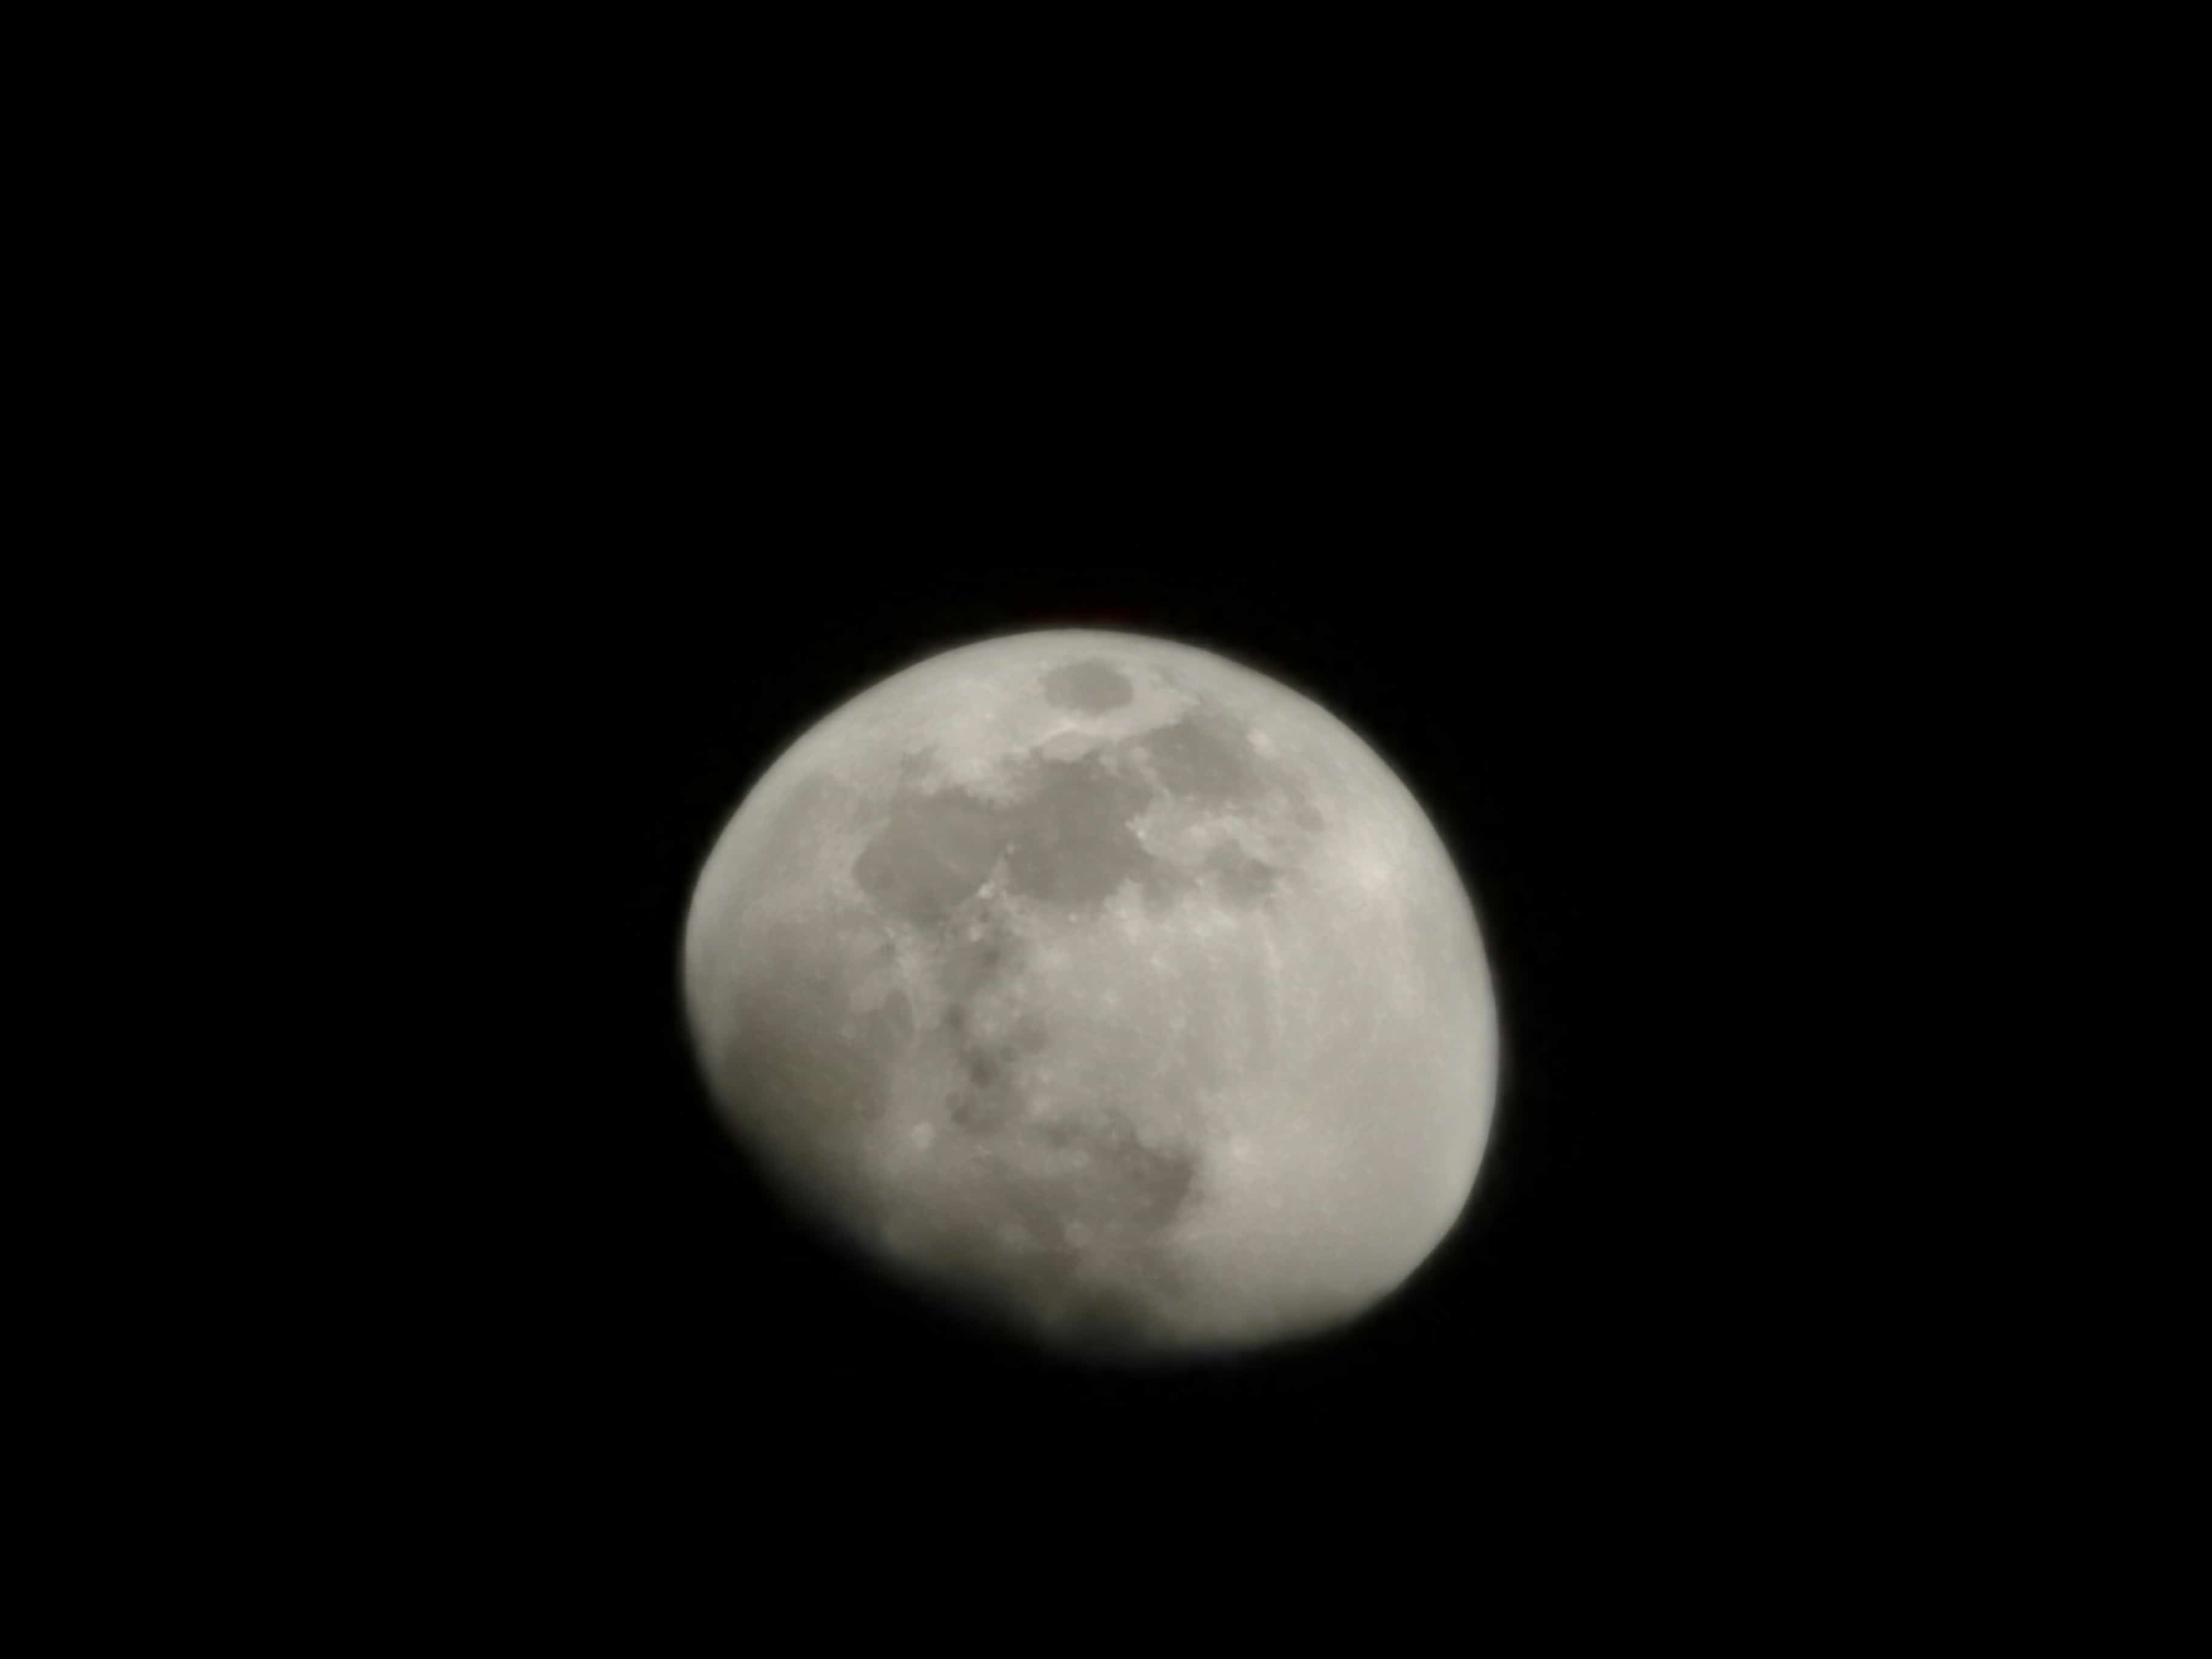 Moon shot at 50x zoom on the Huawei P30 Pro